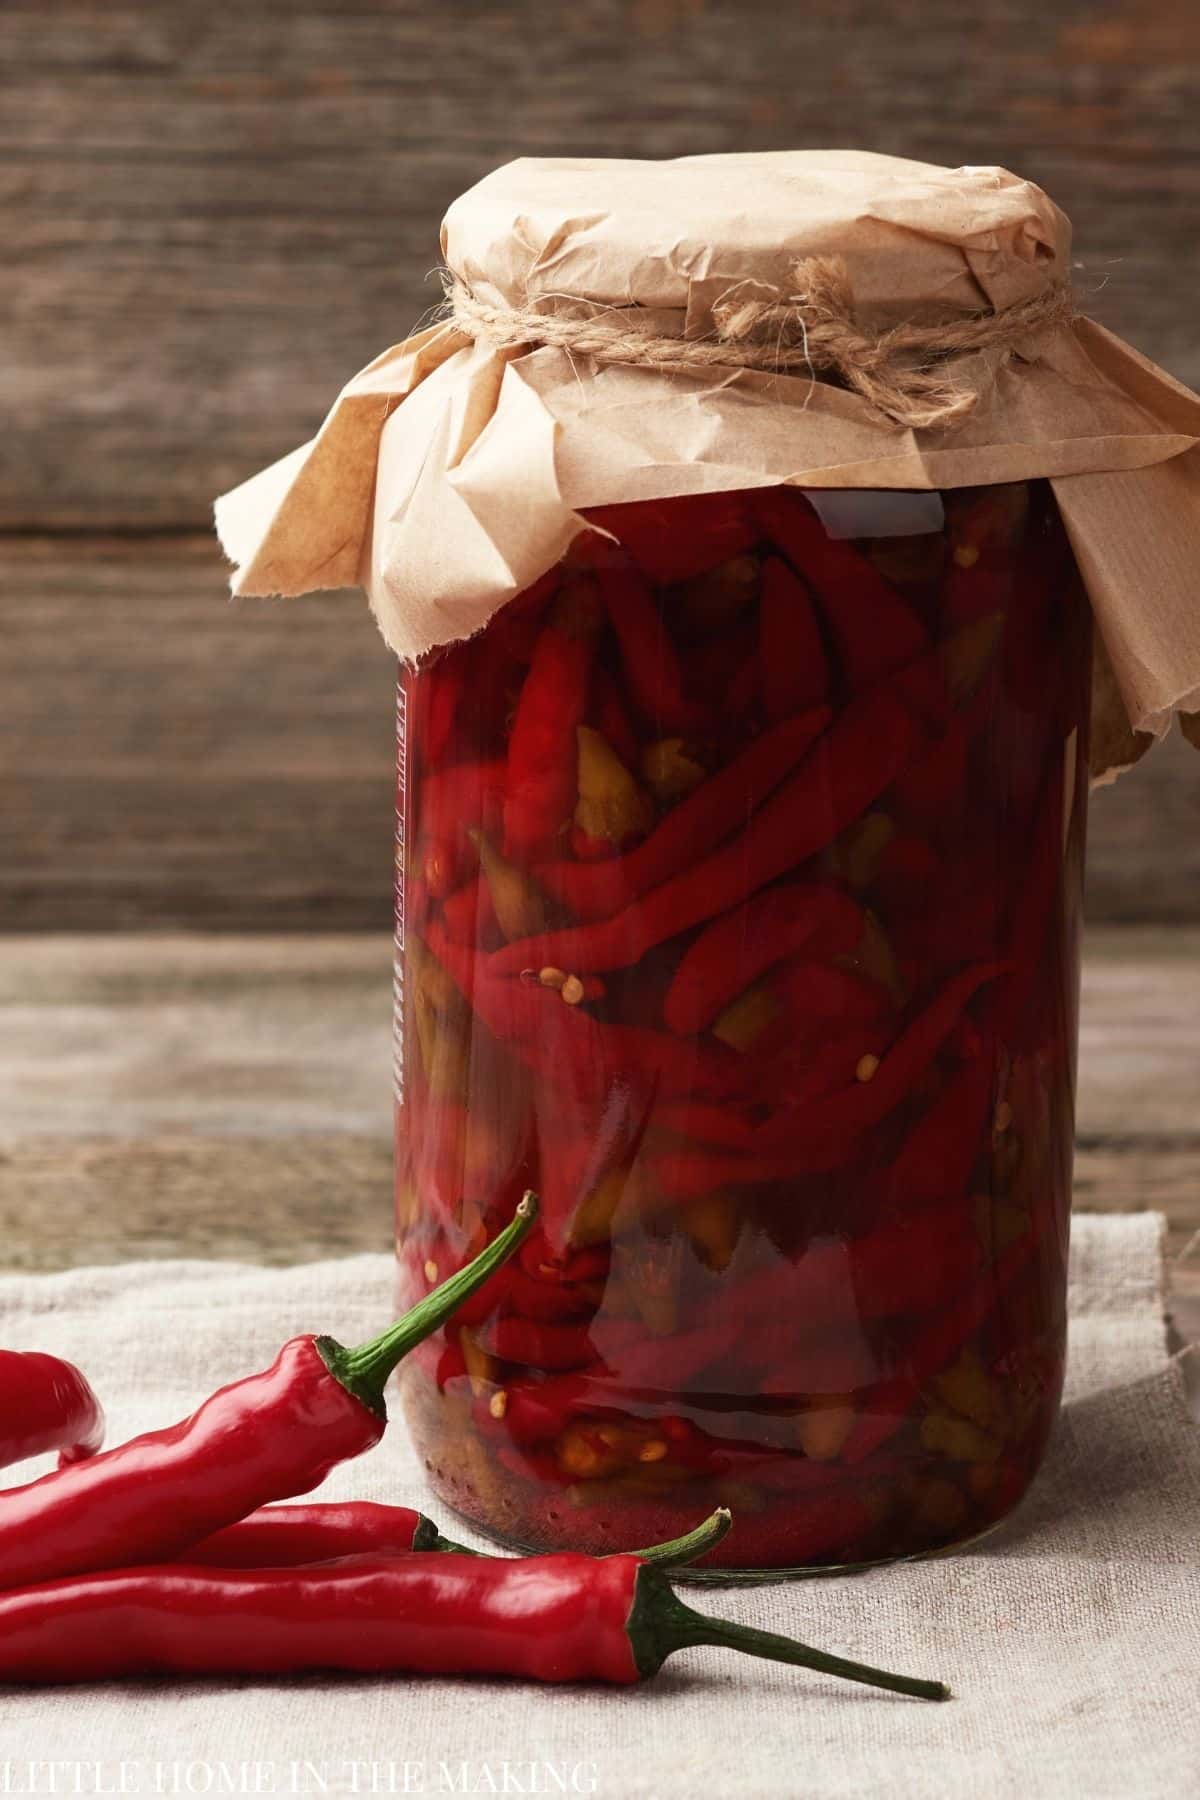 A jar of cayenne peppers getting fermented.